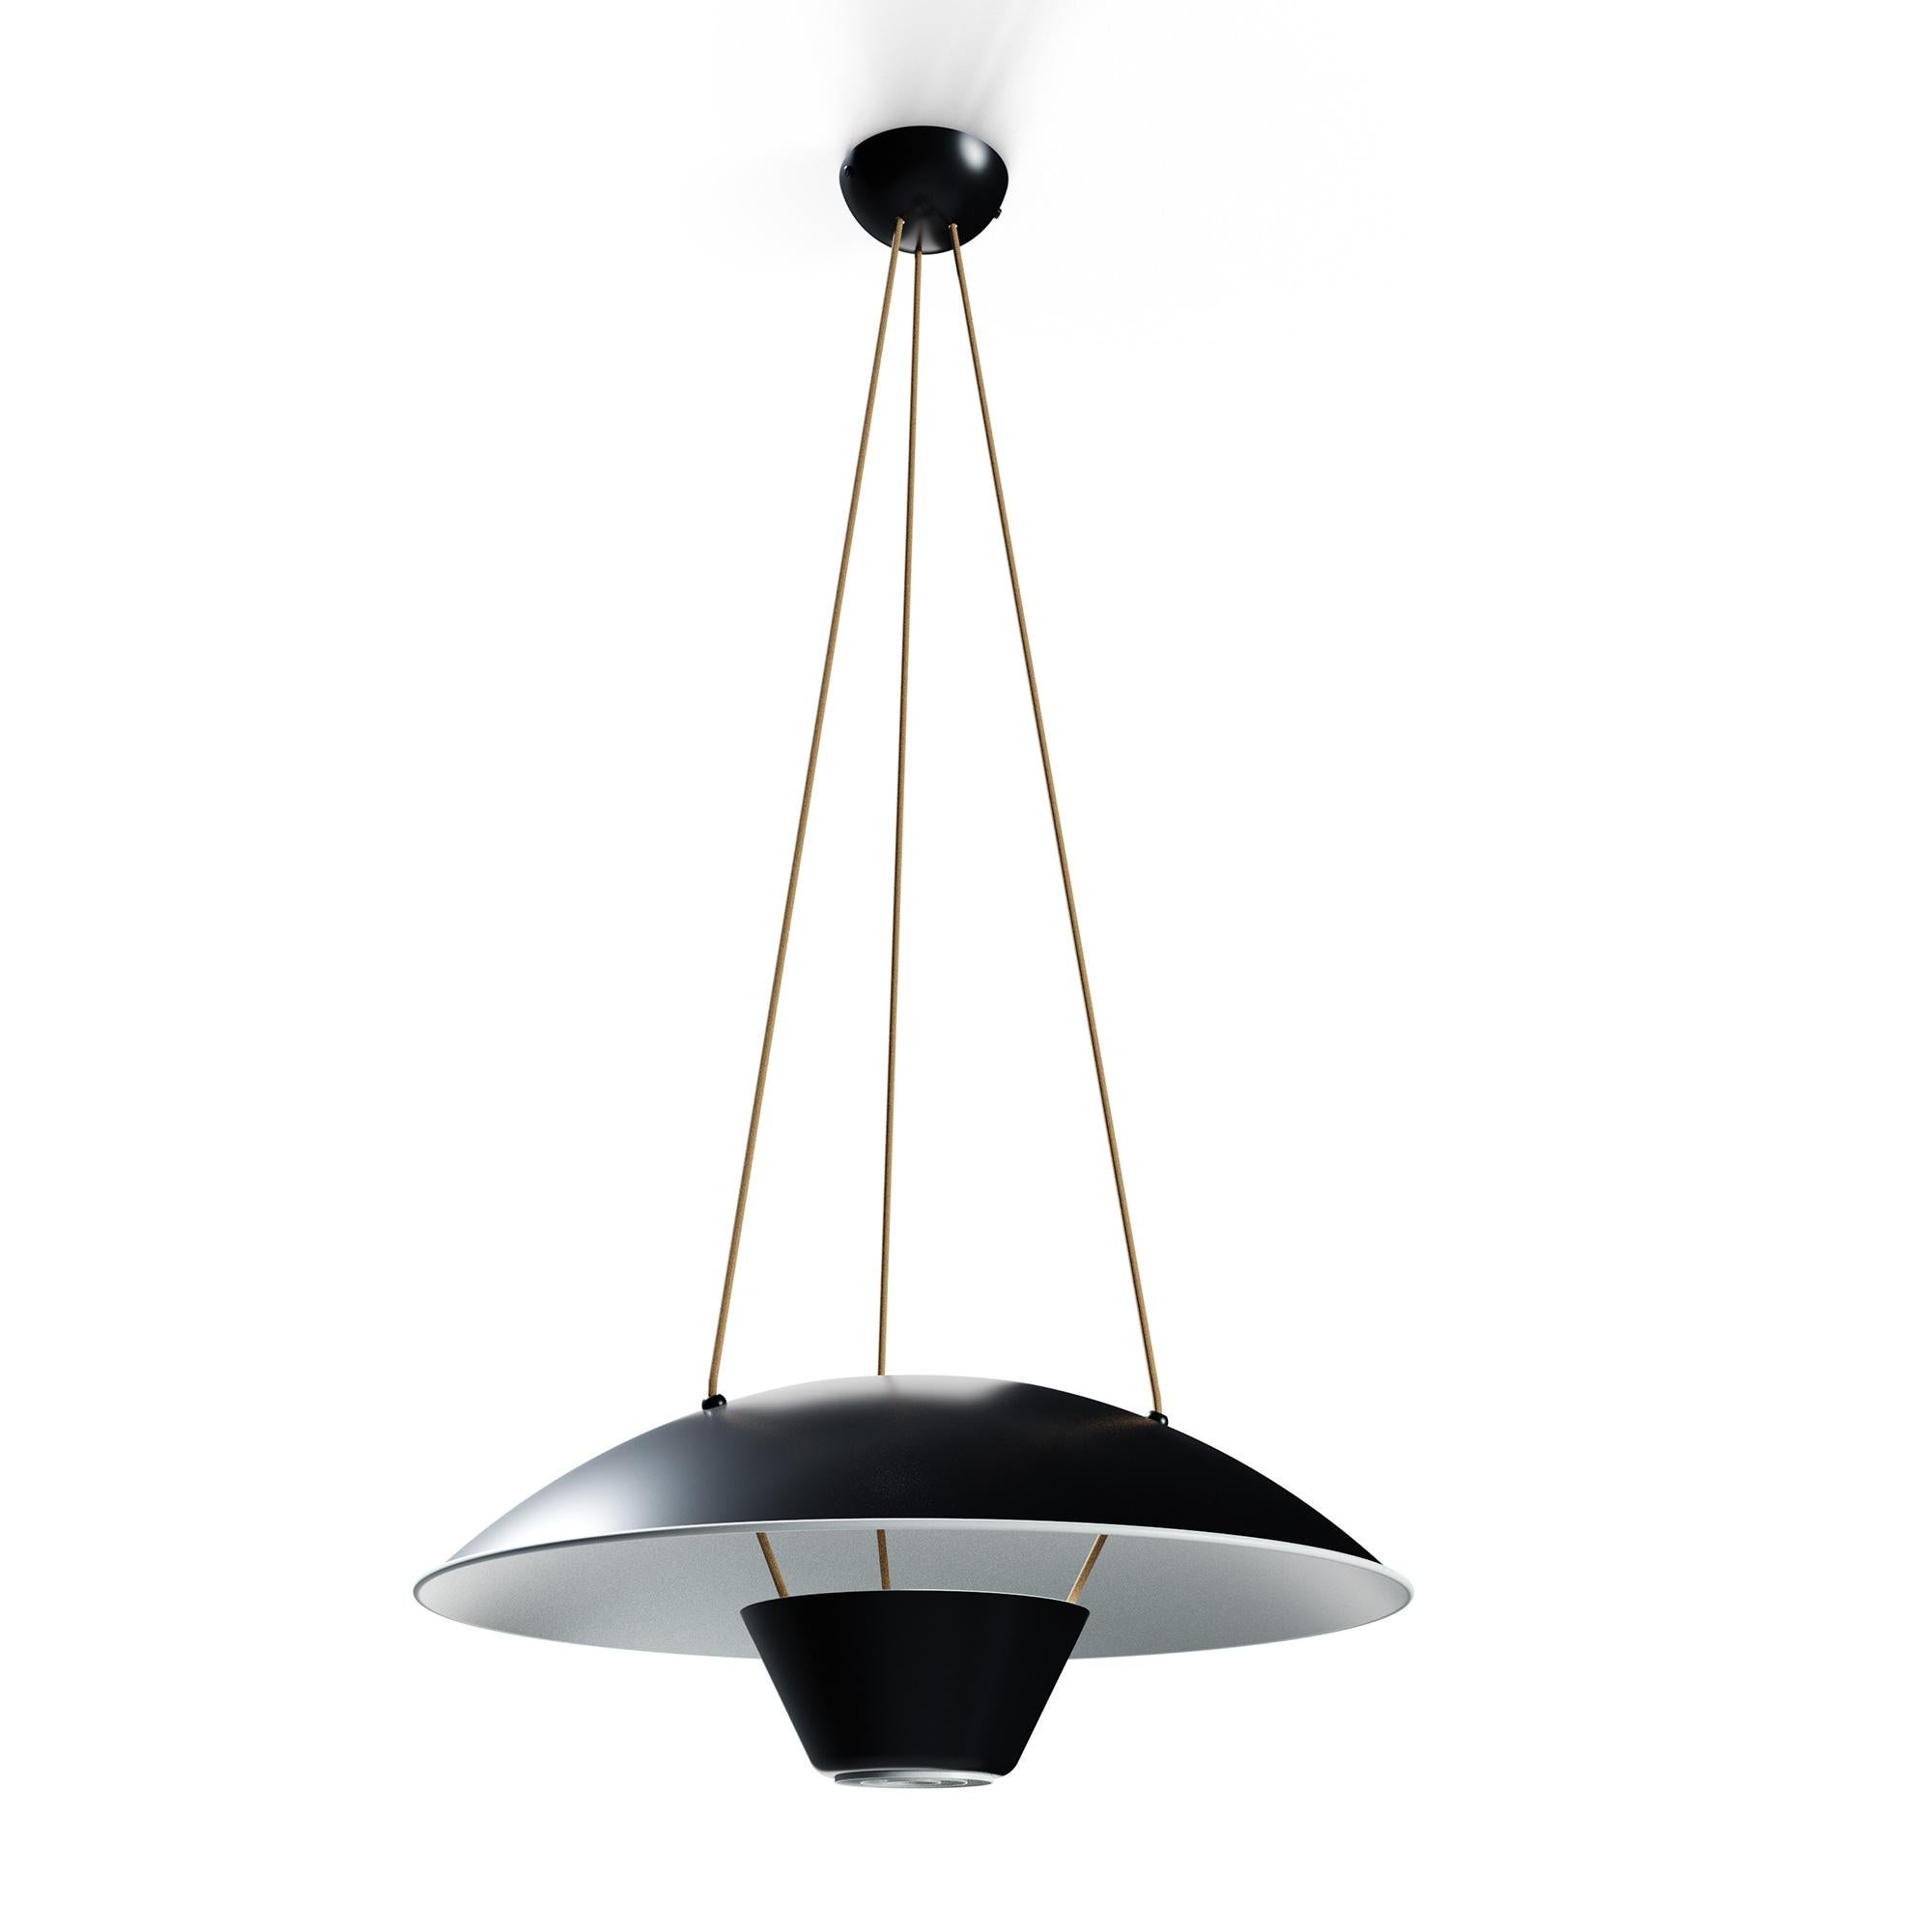 Michel Mortier M4 suspension lamp in black for Disderot. Originally designed in 1952, this sculptural lamp is a newly produced numbered edition with authentication certificate made in France by Disderot with many of the same small-scale